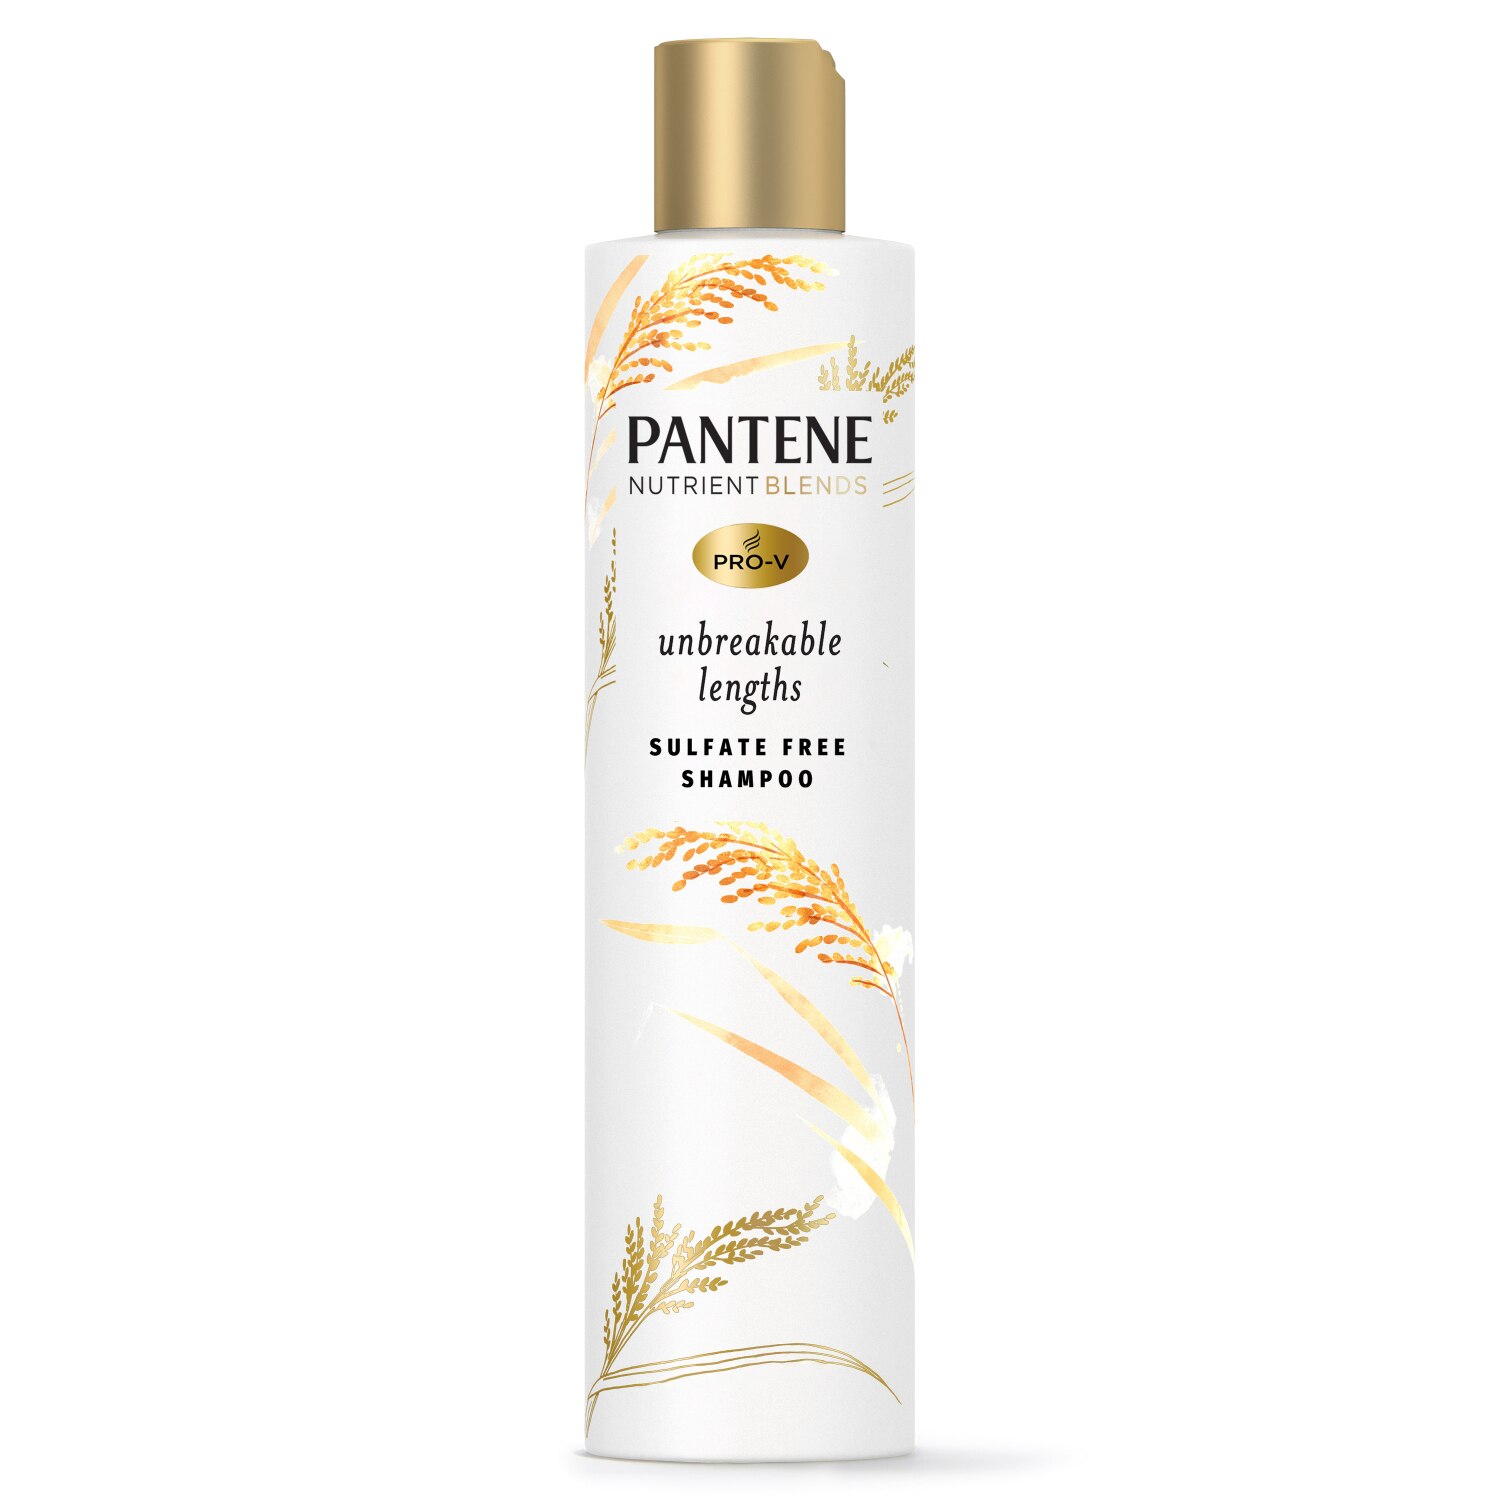 Pantene Nutrient Blends Sulfate Free Shampoo with Rice Water, 9.6 OZ